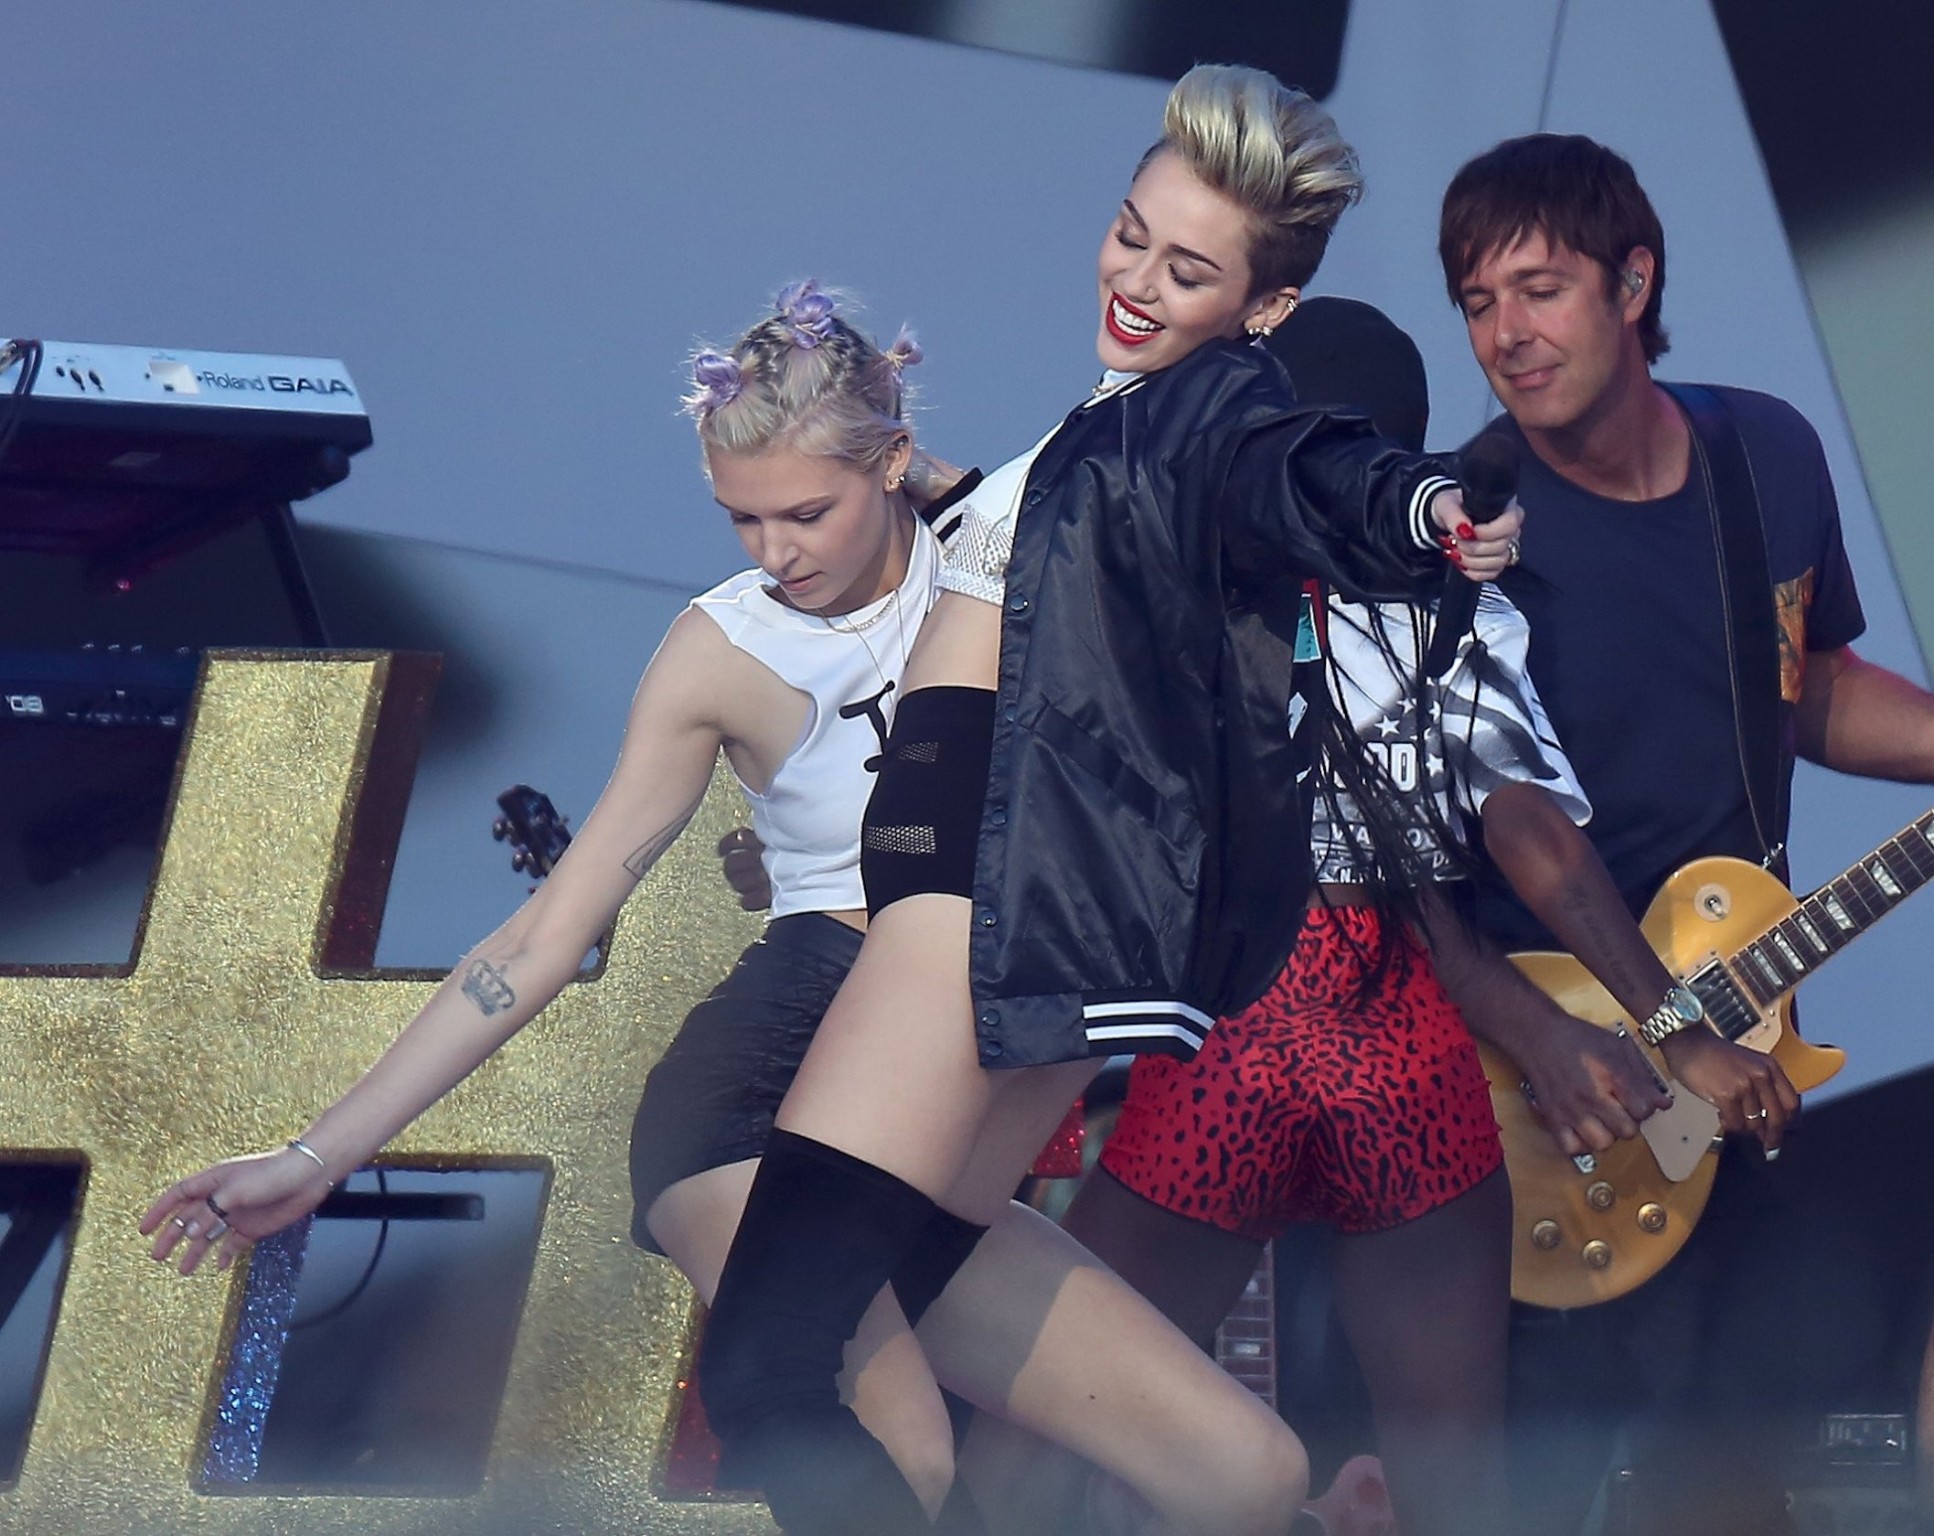 Miley Cyrus in panties  fuck-me boots performing at the Jimmy Kimmel show #75227018